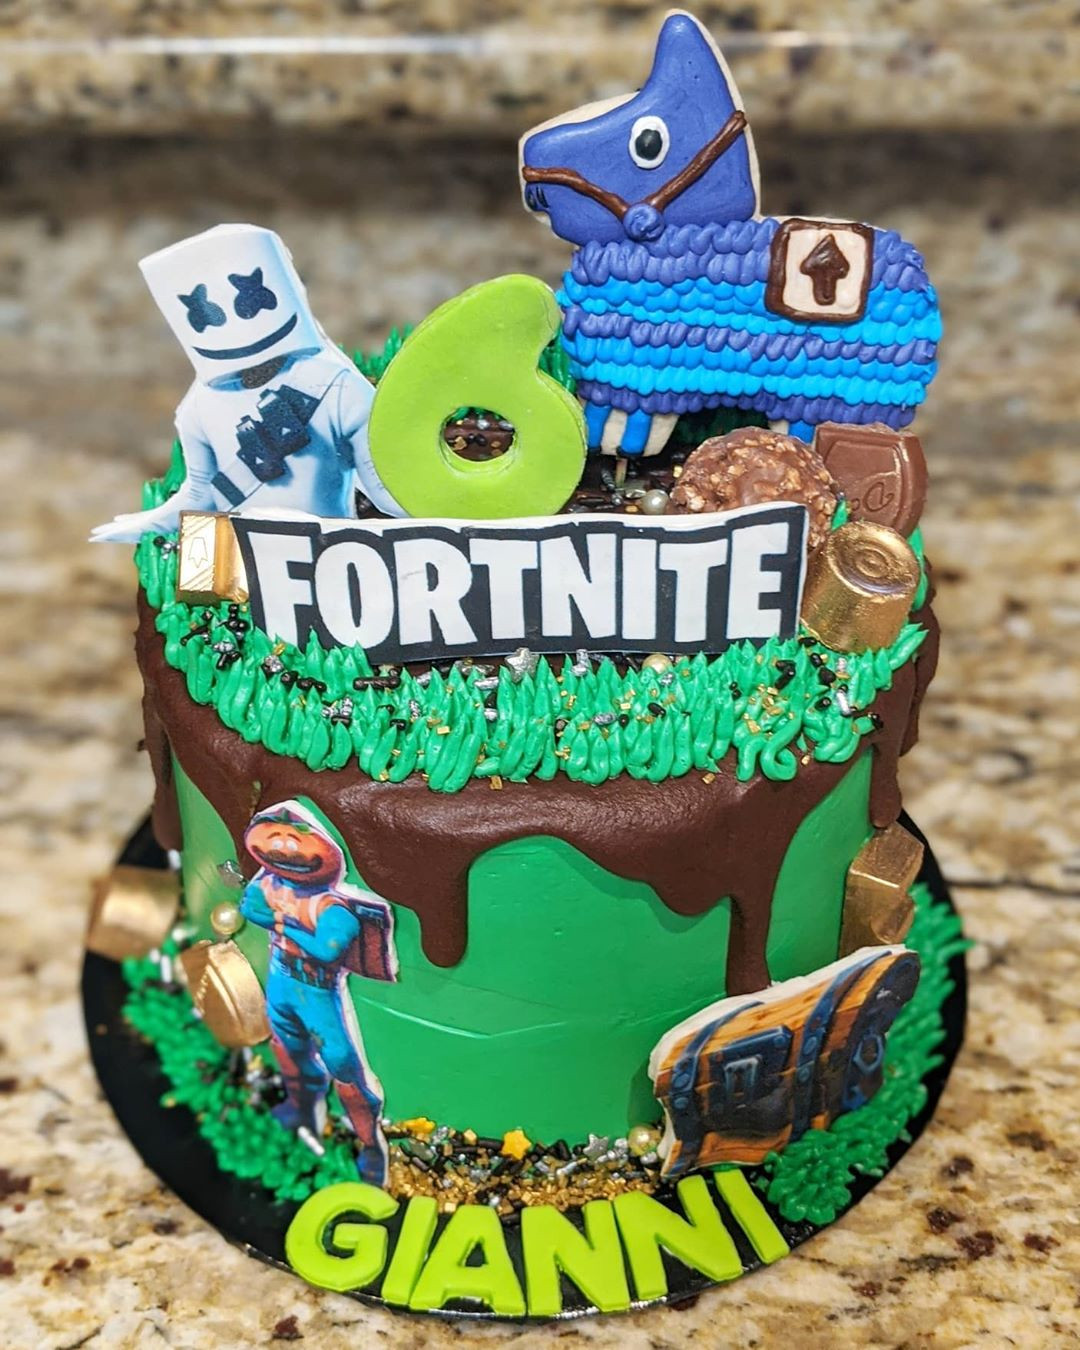 46 Amazing Fortnite Cakes and Cupcakes for an Epic Birthday Bash,fortnite cake ideas easy,easy fortnite cake,how to make a fortnite cake